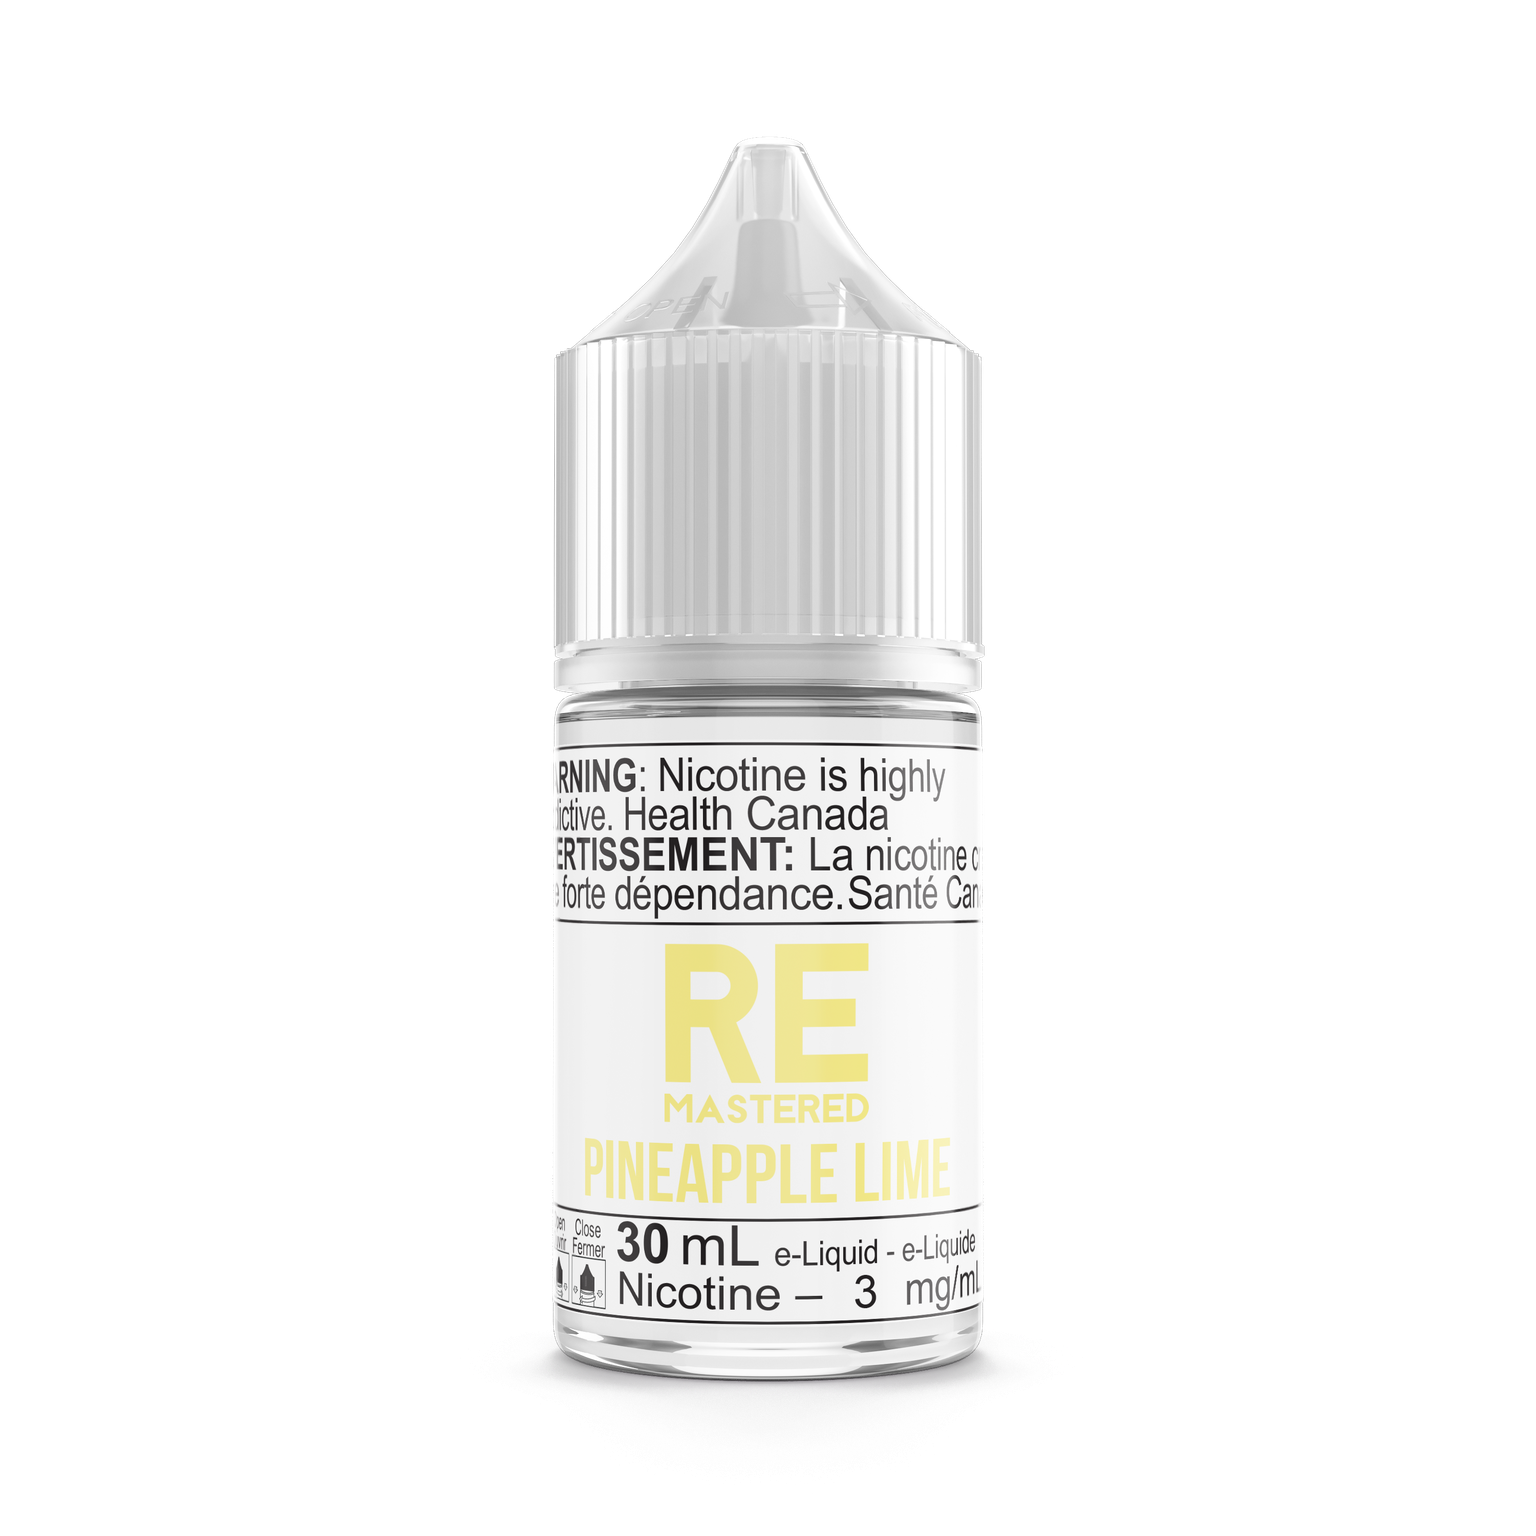 PINEAPPLE LIME BY REMASTERED - 30 ML